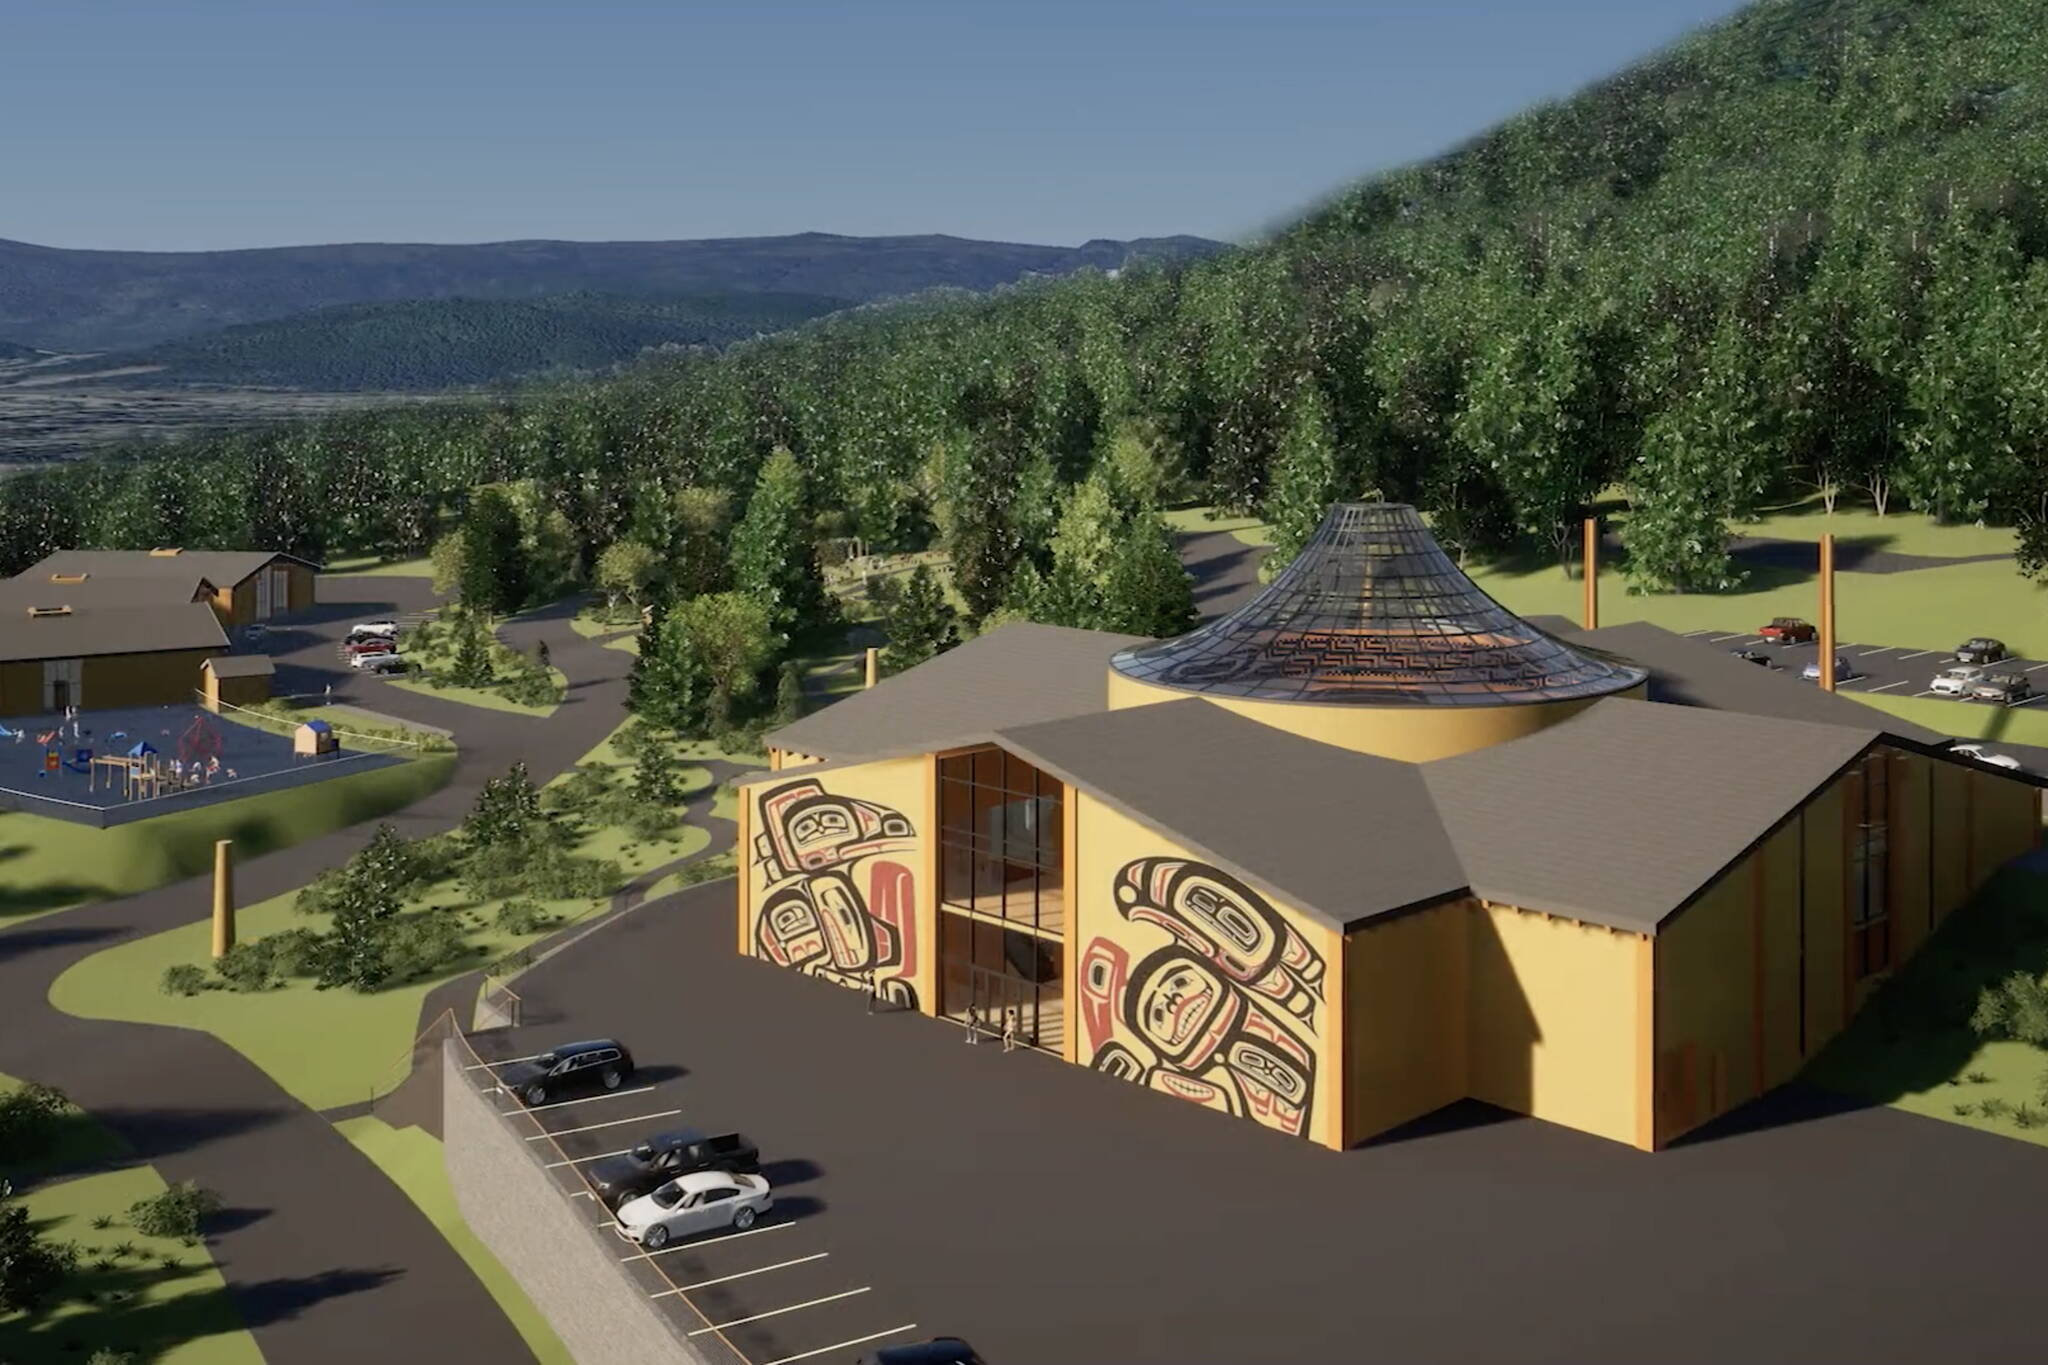 An illustration depicts a planned 12-acre education campus located on 42 acres in Juneau owned by the Central Council of the Tlingit and Haida Indian Tribes of Alaska, which was announced during the opening of its annual tribal assembly Wednesday. (Image courtesy of the Central Council of the Tlingit and Haida Indian Tribes of Alaska)